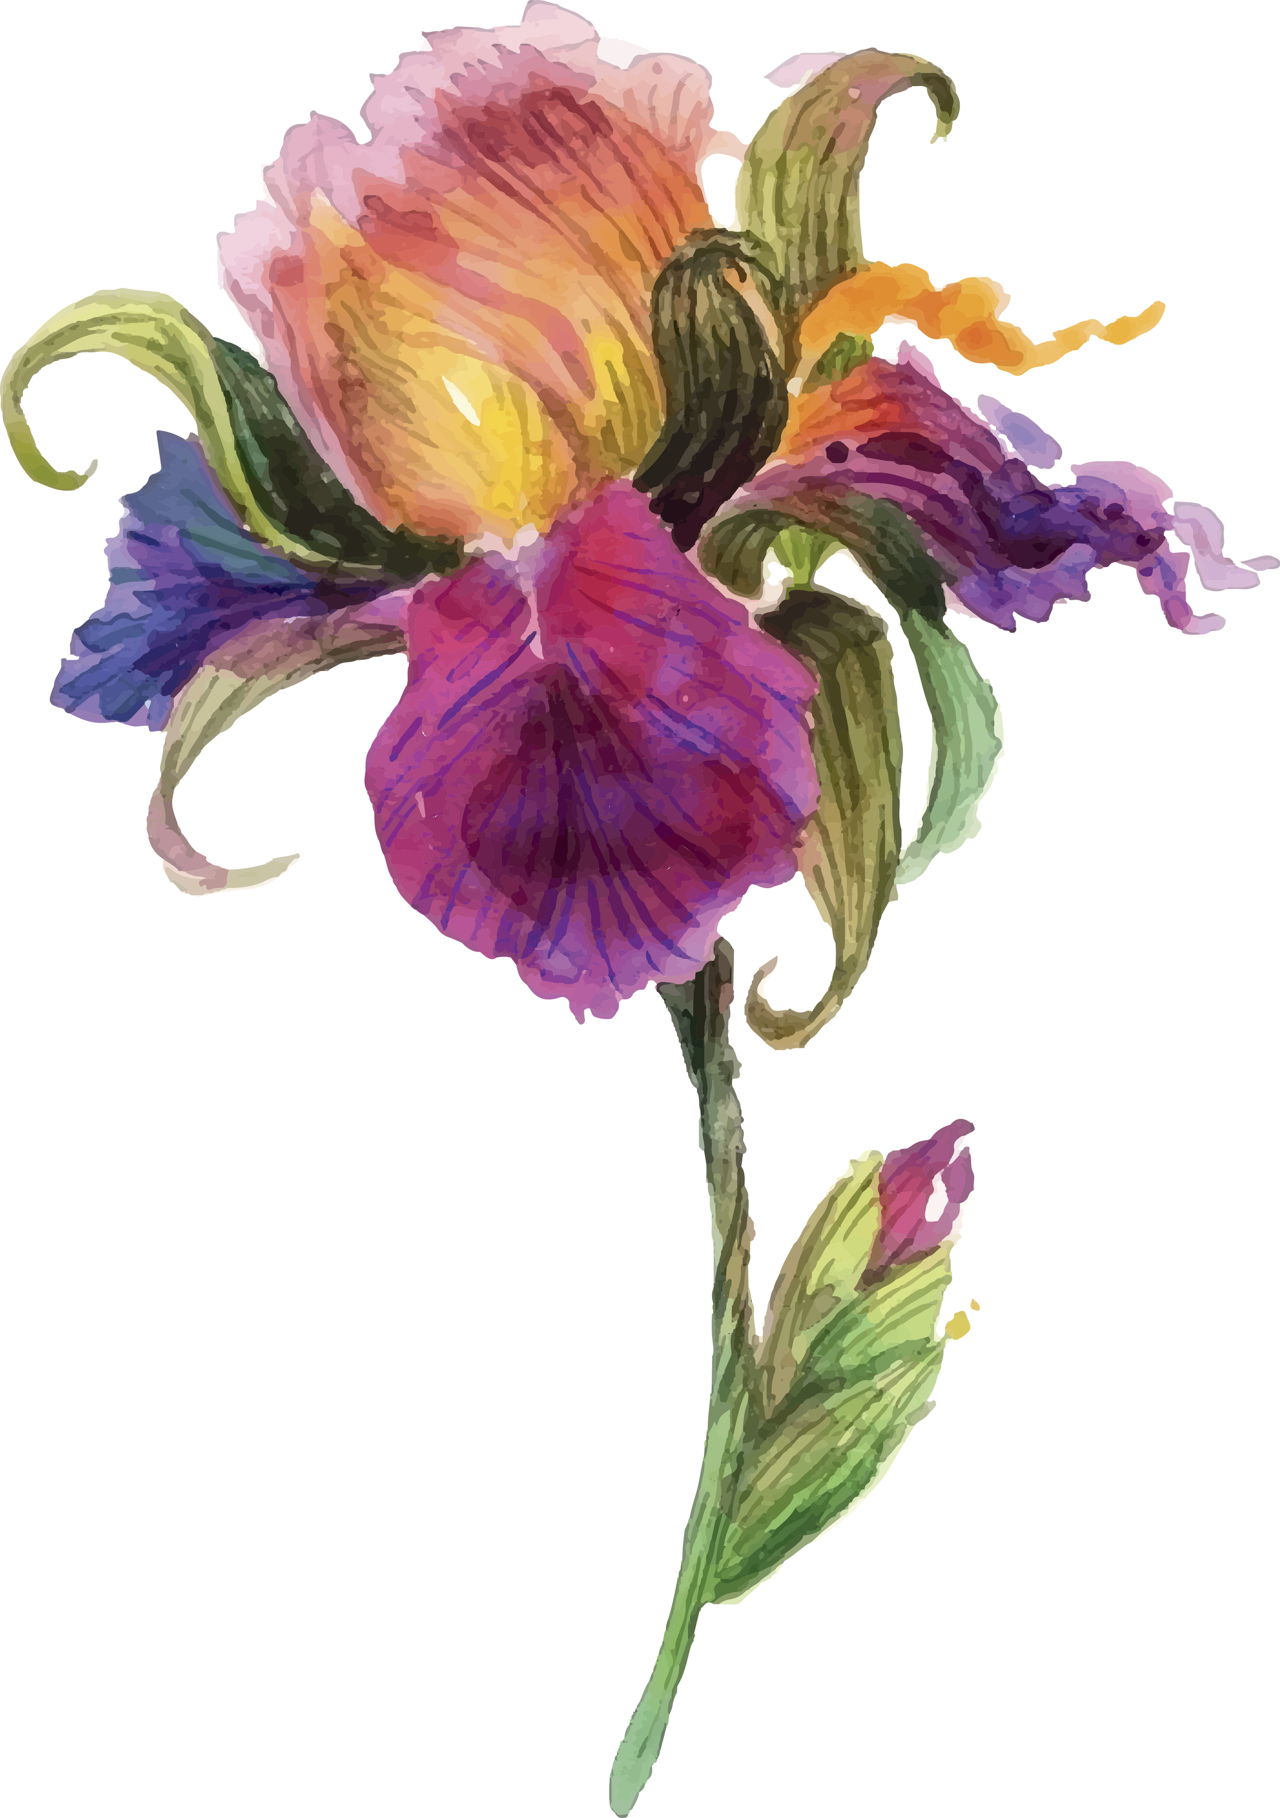 Learn How to Draw Flowers With These Step-by-step Instructions